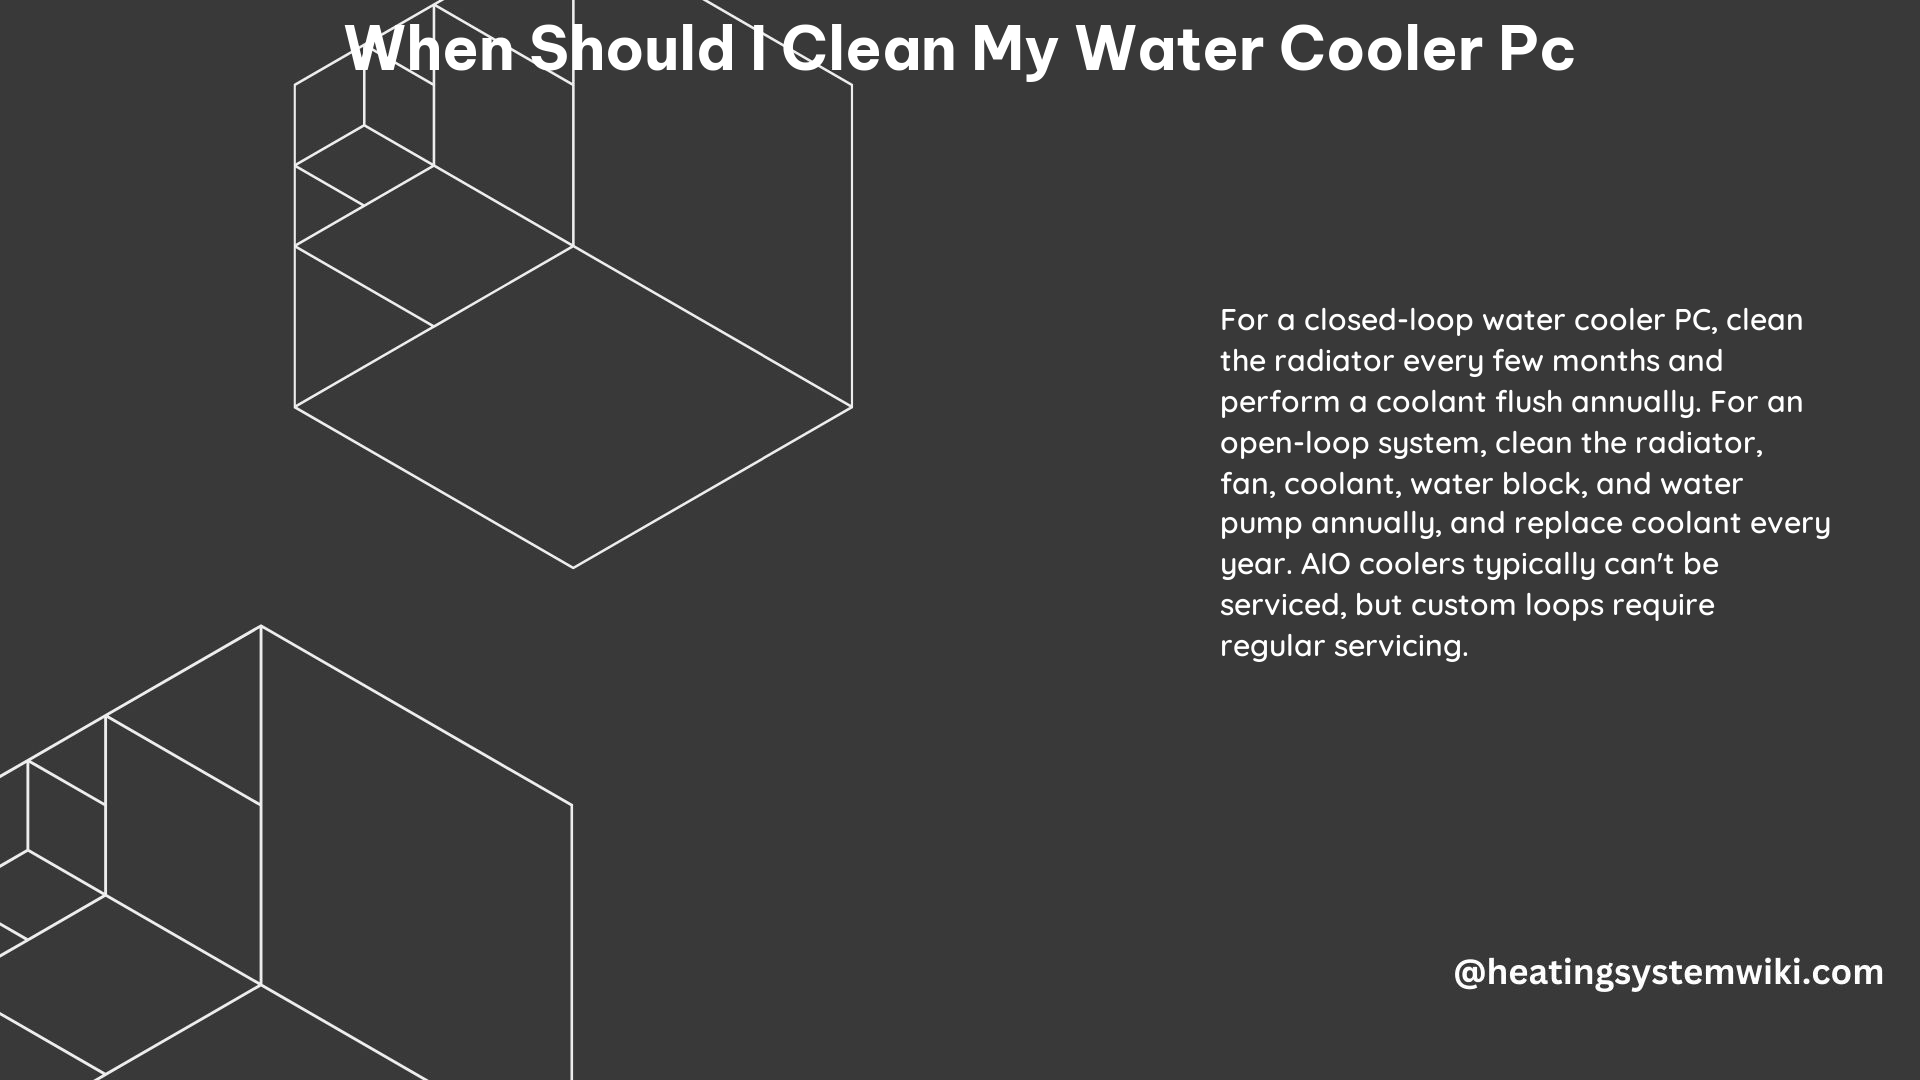 When Should I Clean My Water Cooler PC